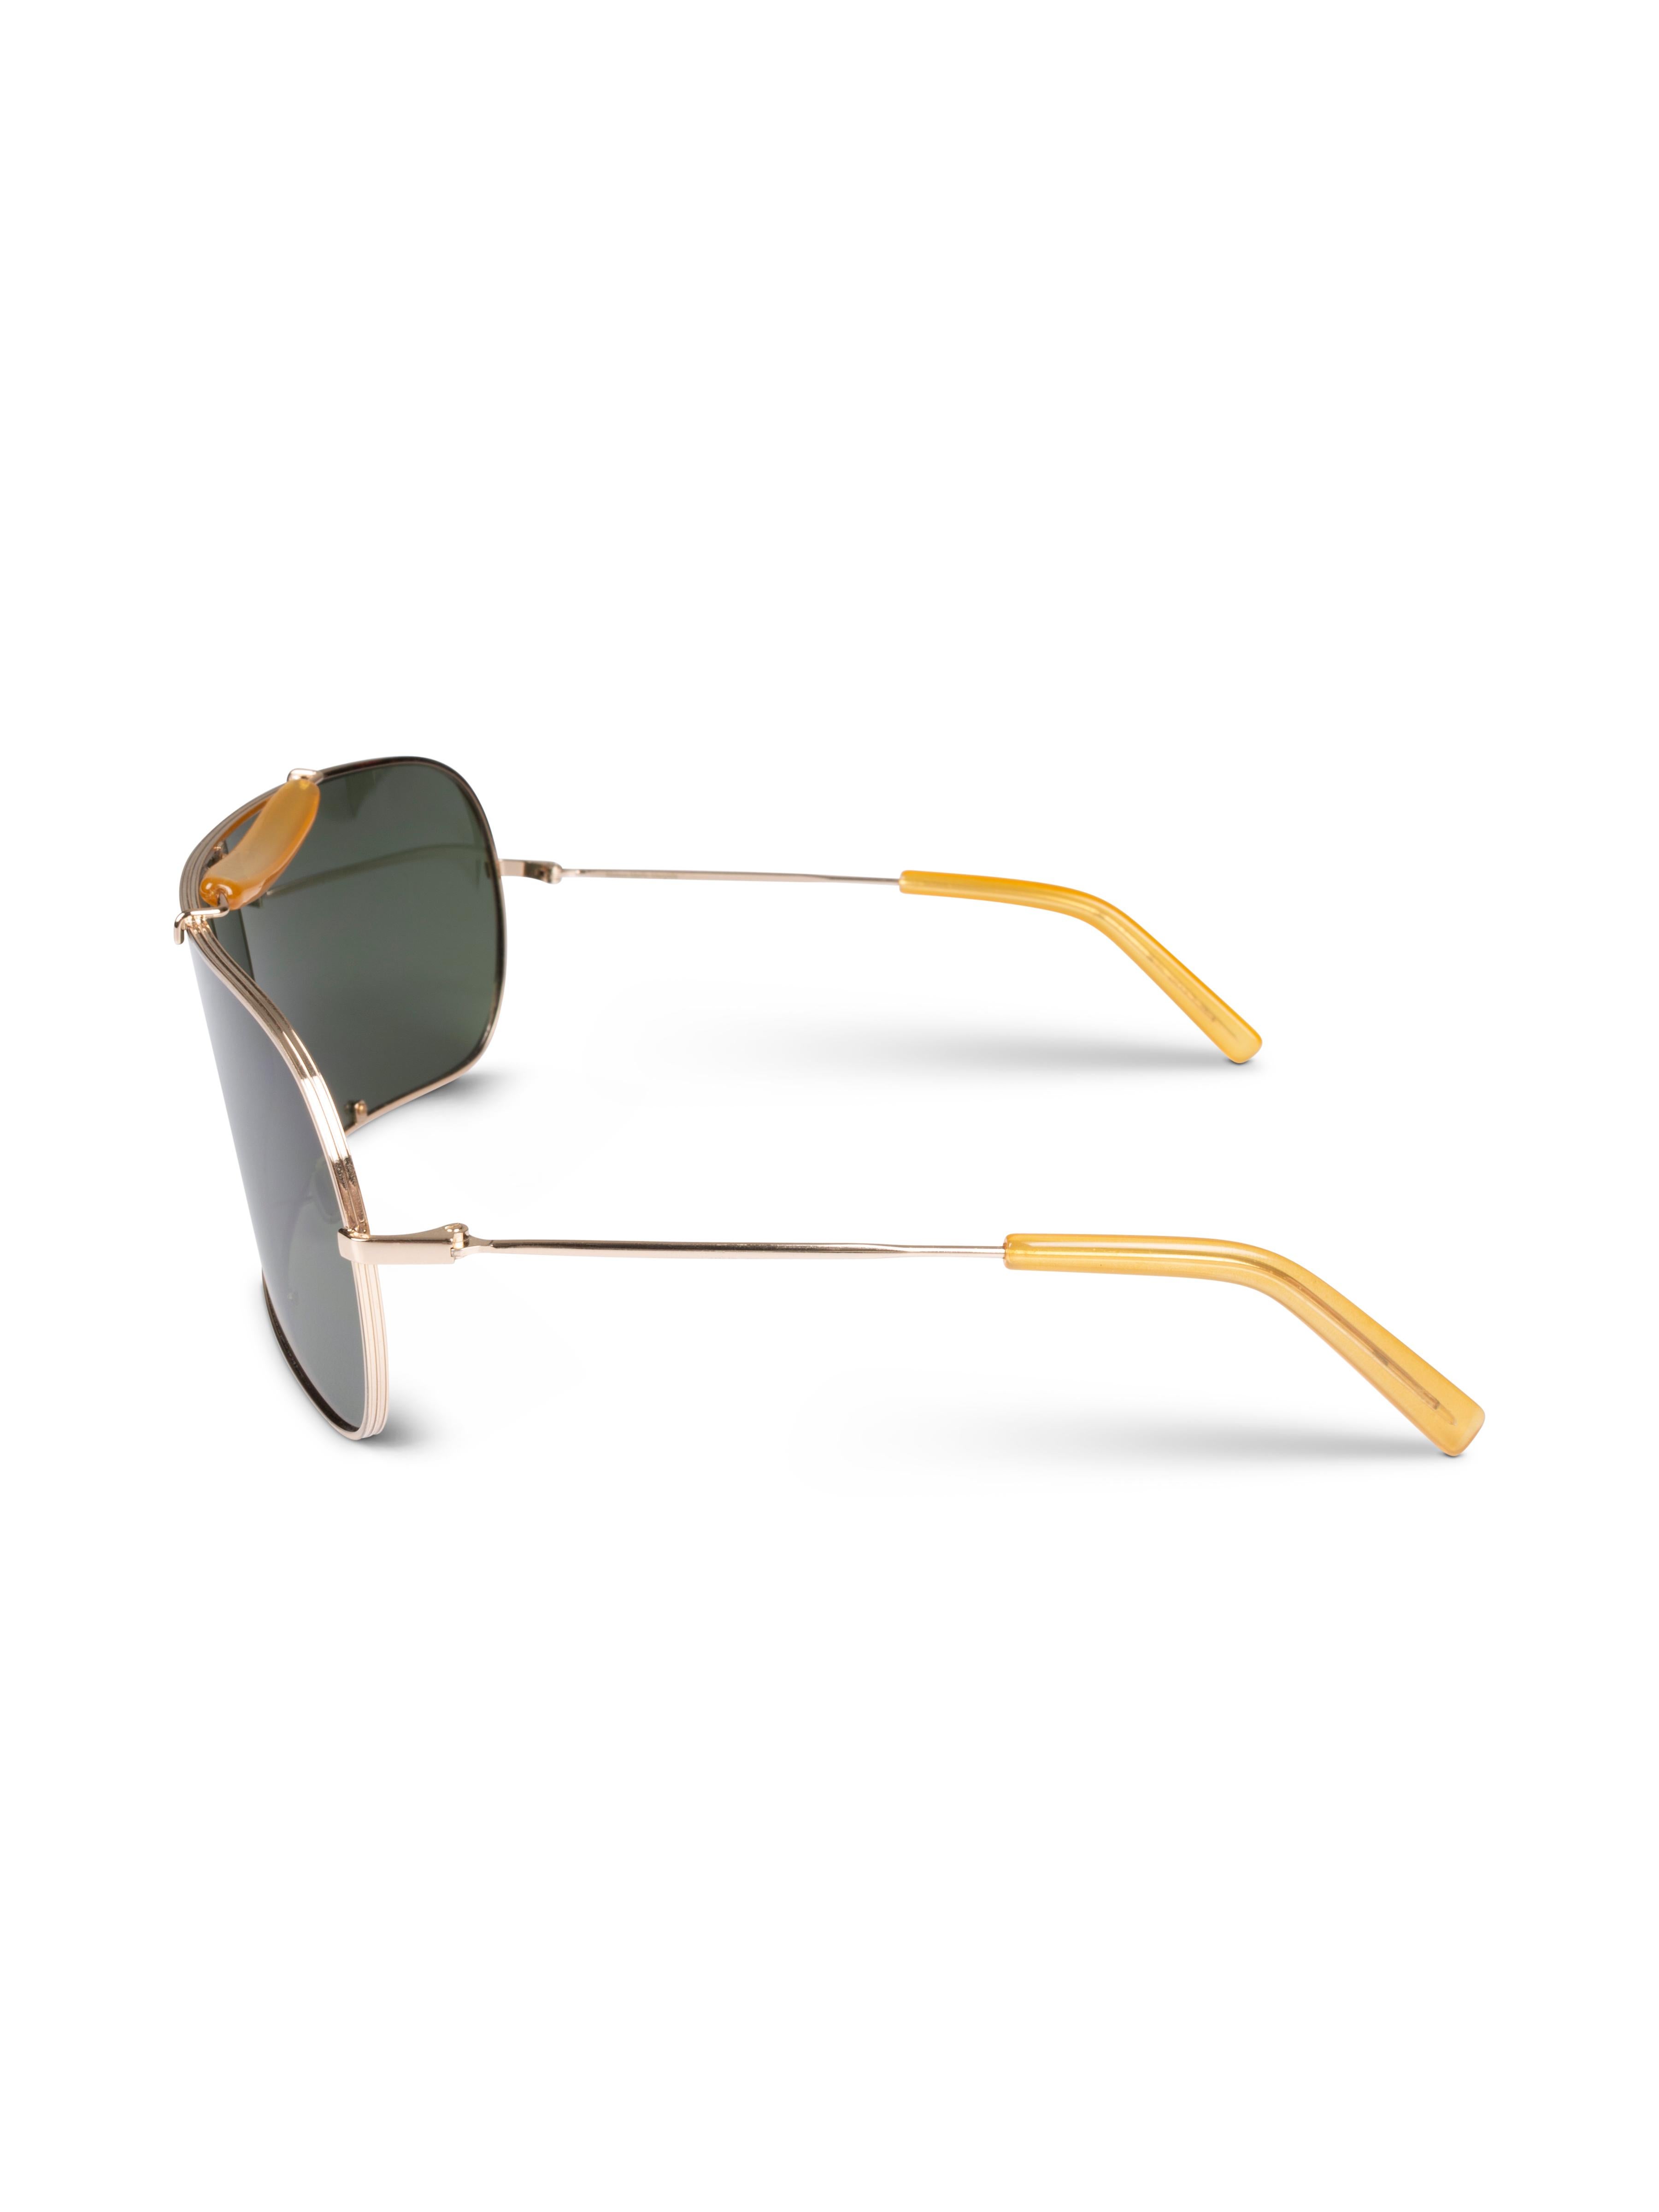 Maison Margiela Incognito - For Sale on 1stDibs | margiela incognito  sunglasses, margiela incognito glasses, martin margiela ss2009 l'incognito  sunglasses